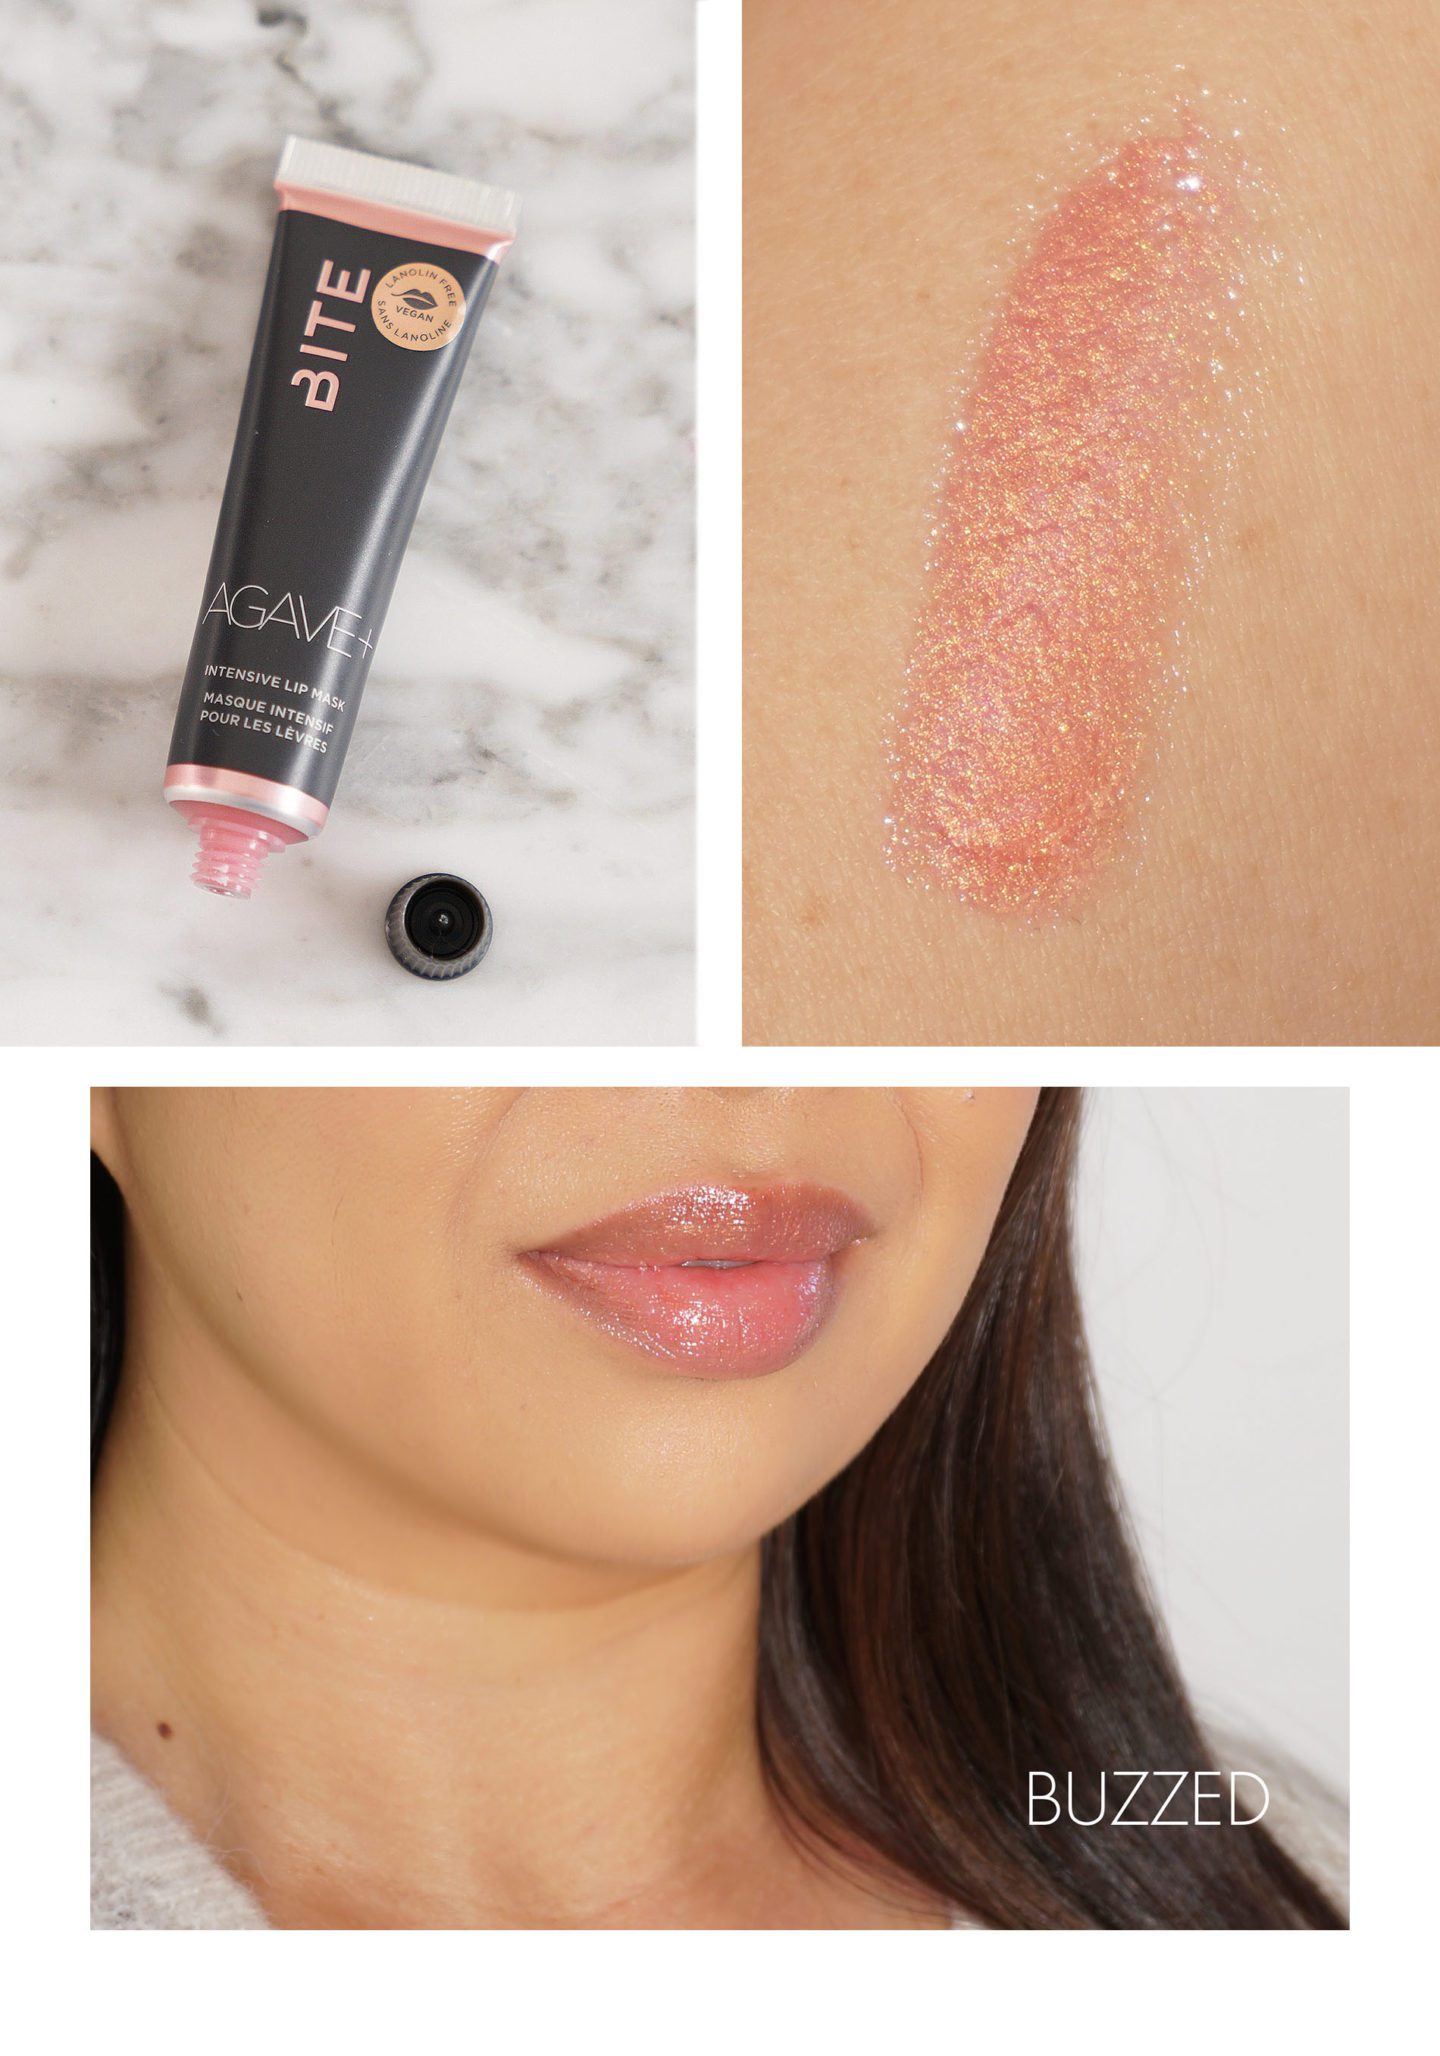 Bite Beauty Agave+ Lip Mask Buzzed swatches